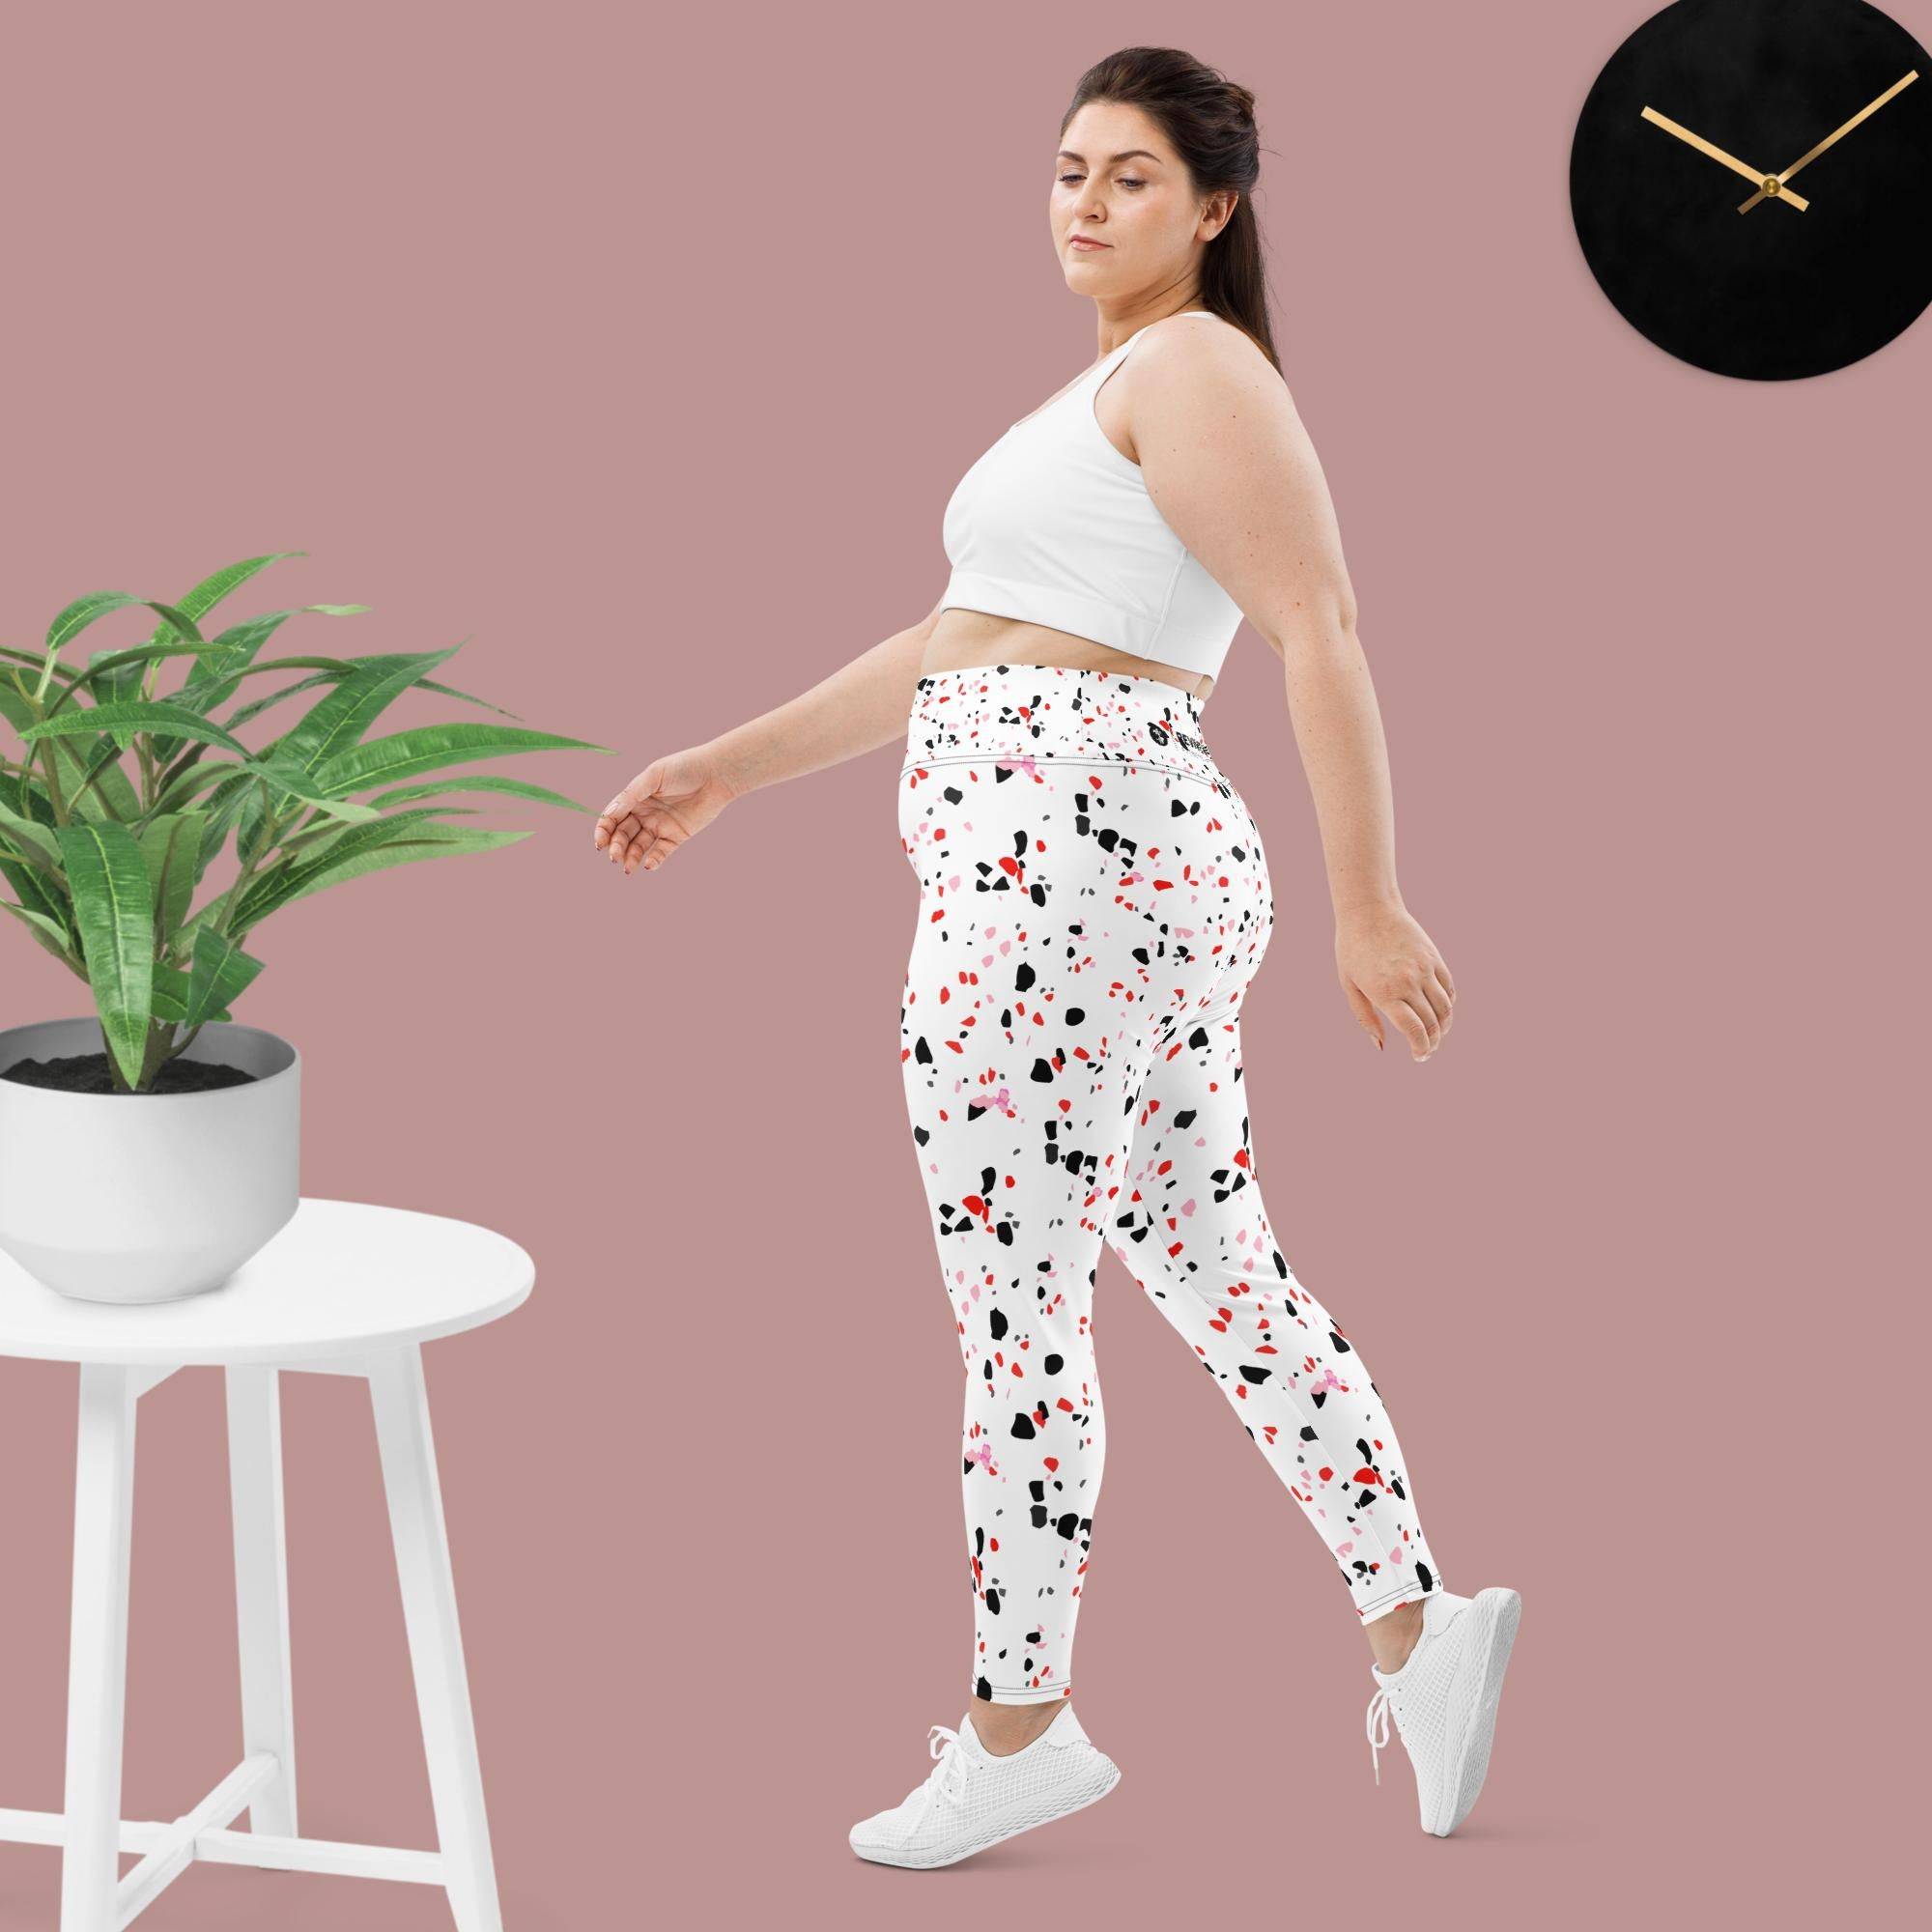 Radiant Leggings Plus Size High Waist Leggings - Revive Wear Radiant Leggings Plus Size. 30-day returns. Supportive and flattering feel. Order now at Revive Wear.